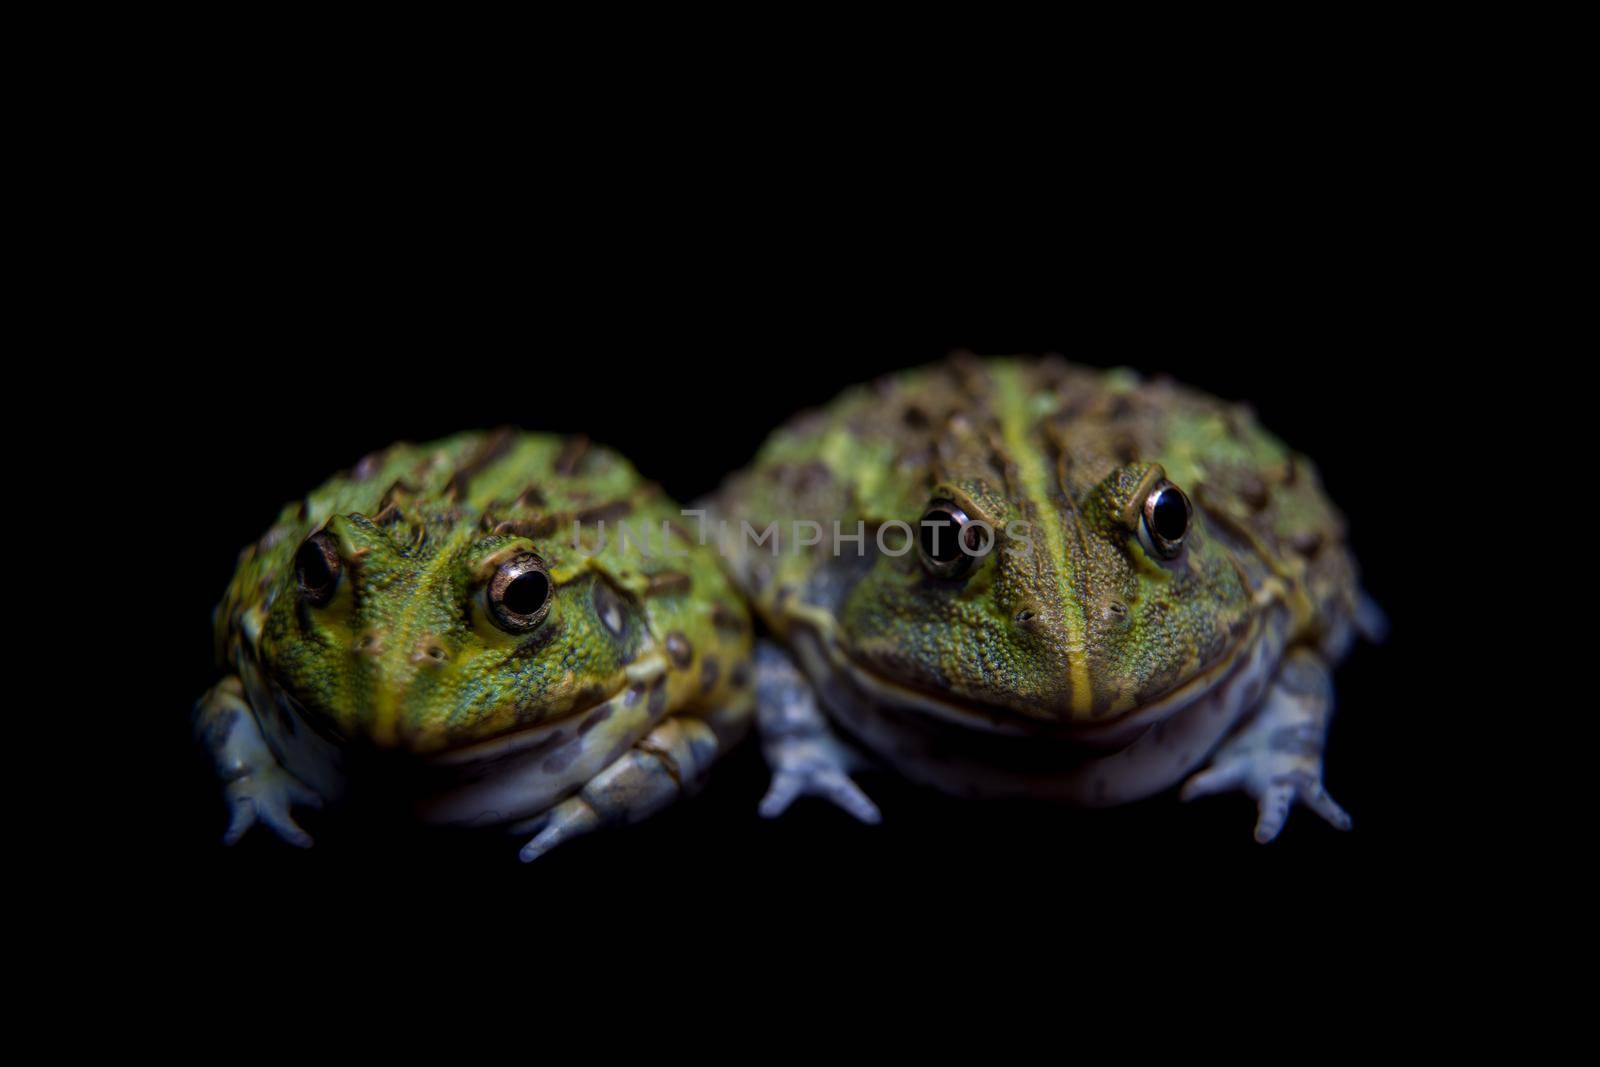 The African bullfrog, Pyxicephalus adspersus, isolated on black background